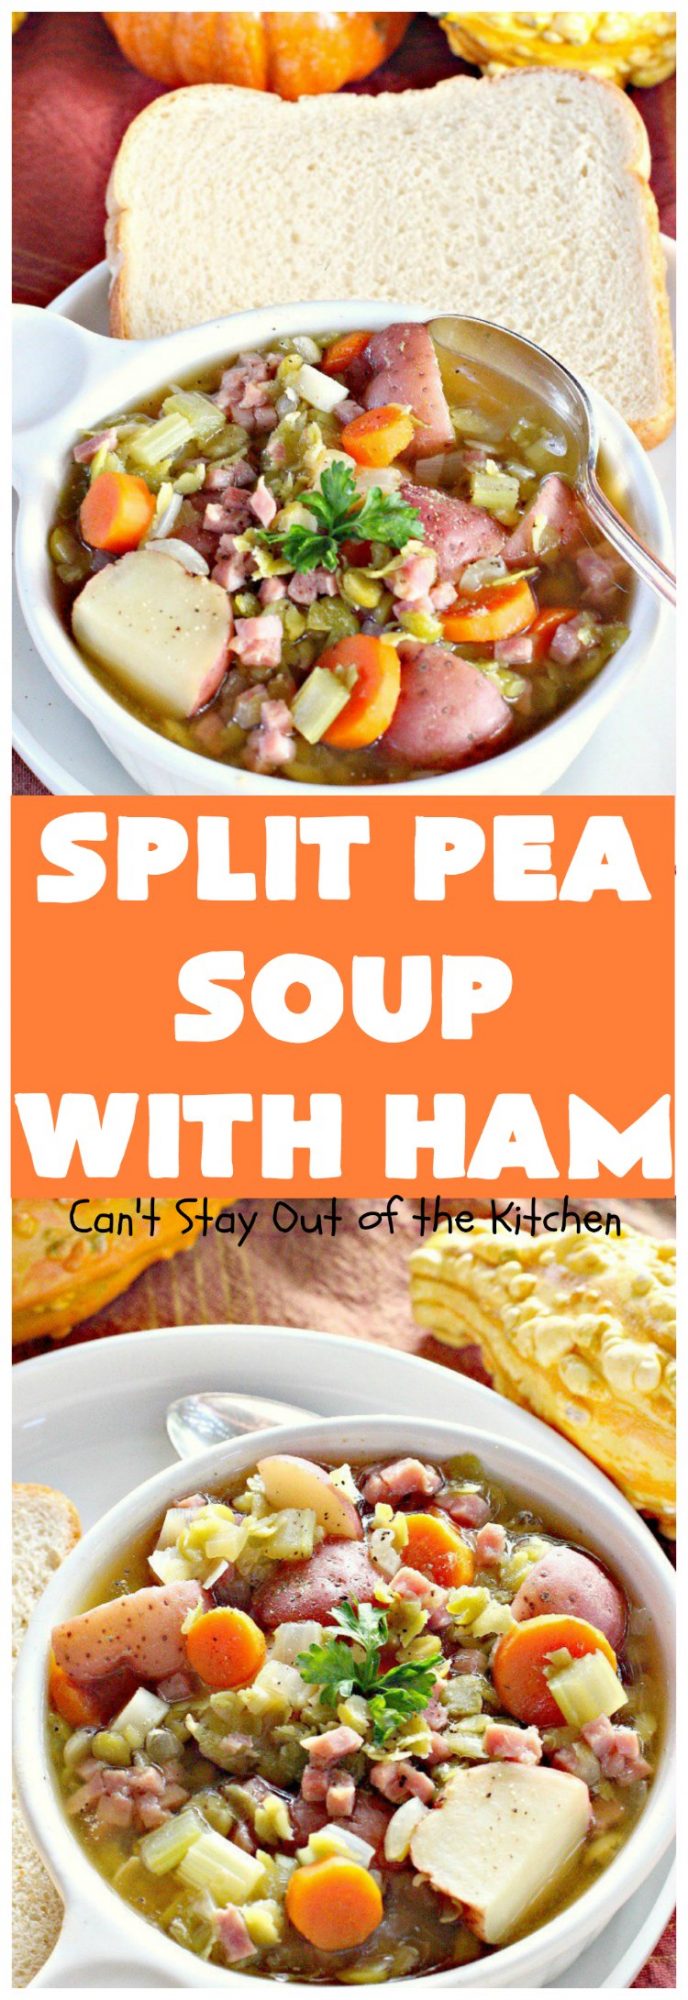 Ham and Lima Bean Soup - Can't Stay Out of the Kitchen